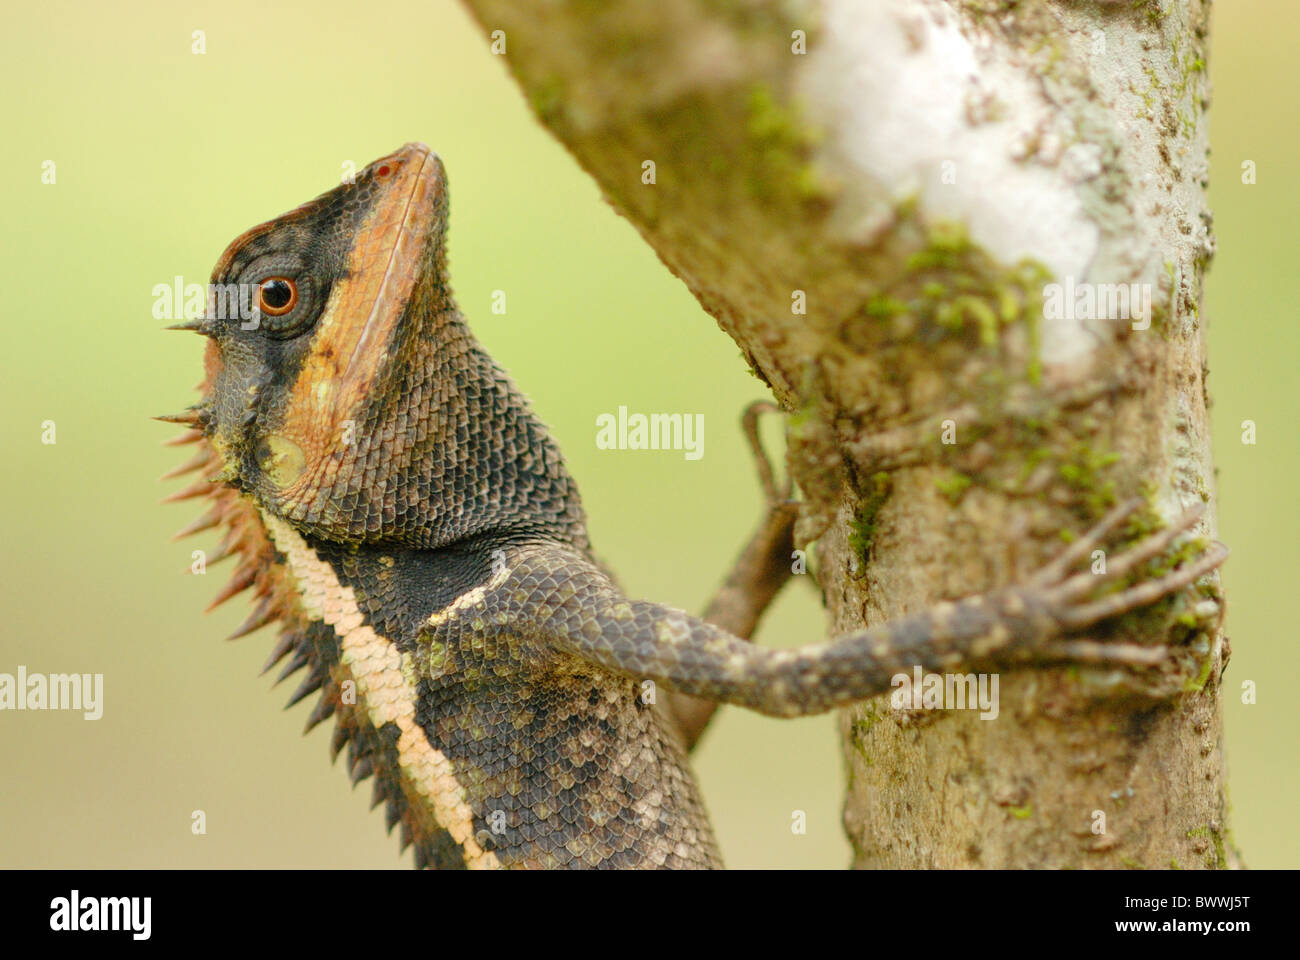 animal animals reptile reptiles lizard lizards agama agamas agamid agamids 'forest dragon' 'forest dragons' wildlife nature Stock Photo